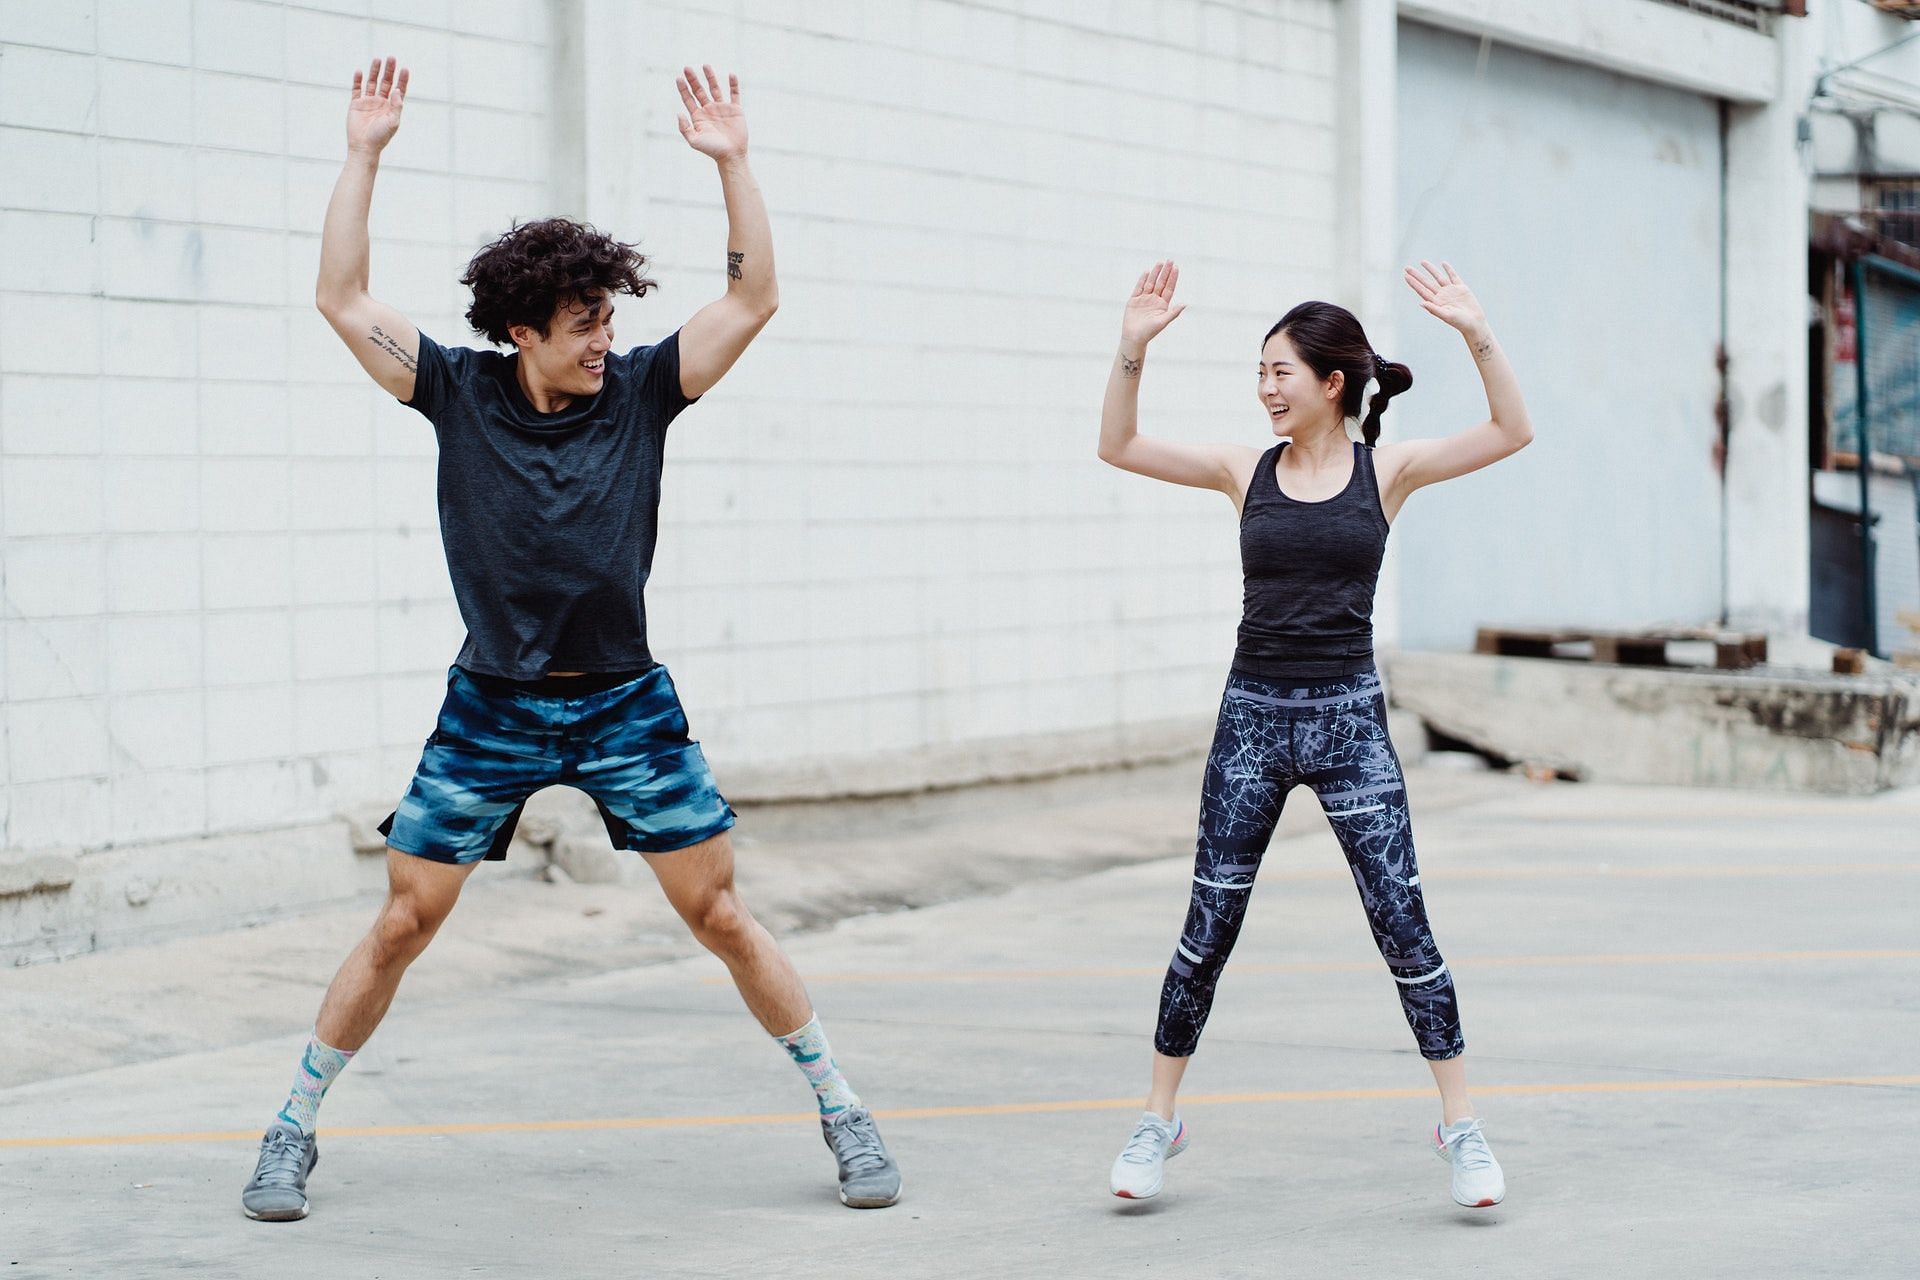 Jumping jacks can help you lose weight. (Image via Pexels/Photo by Ketut Subiyanto)